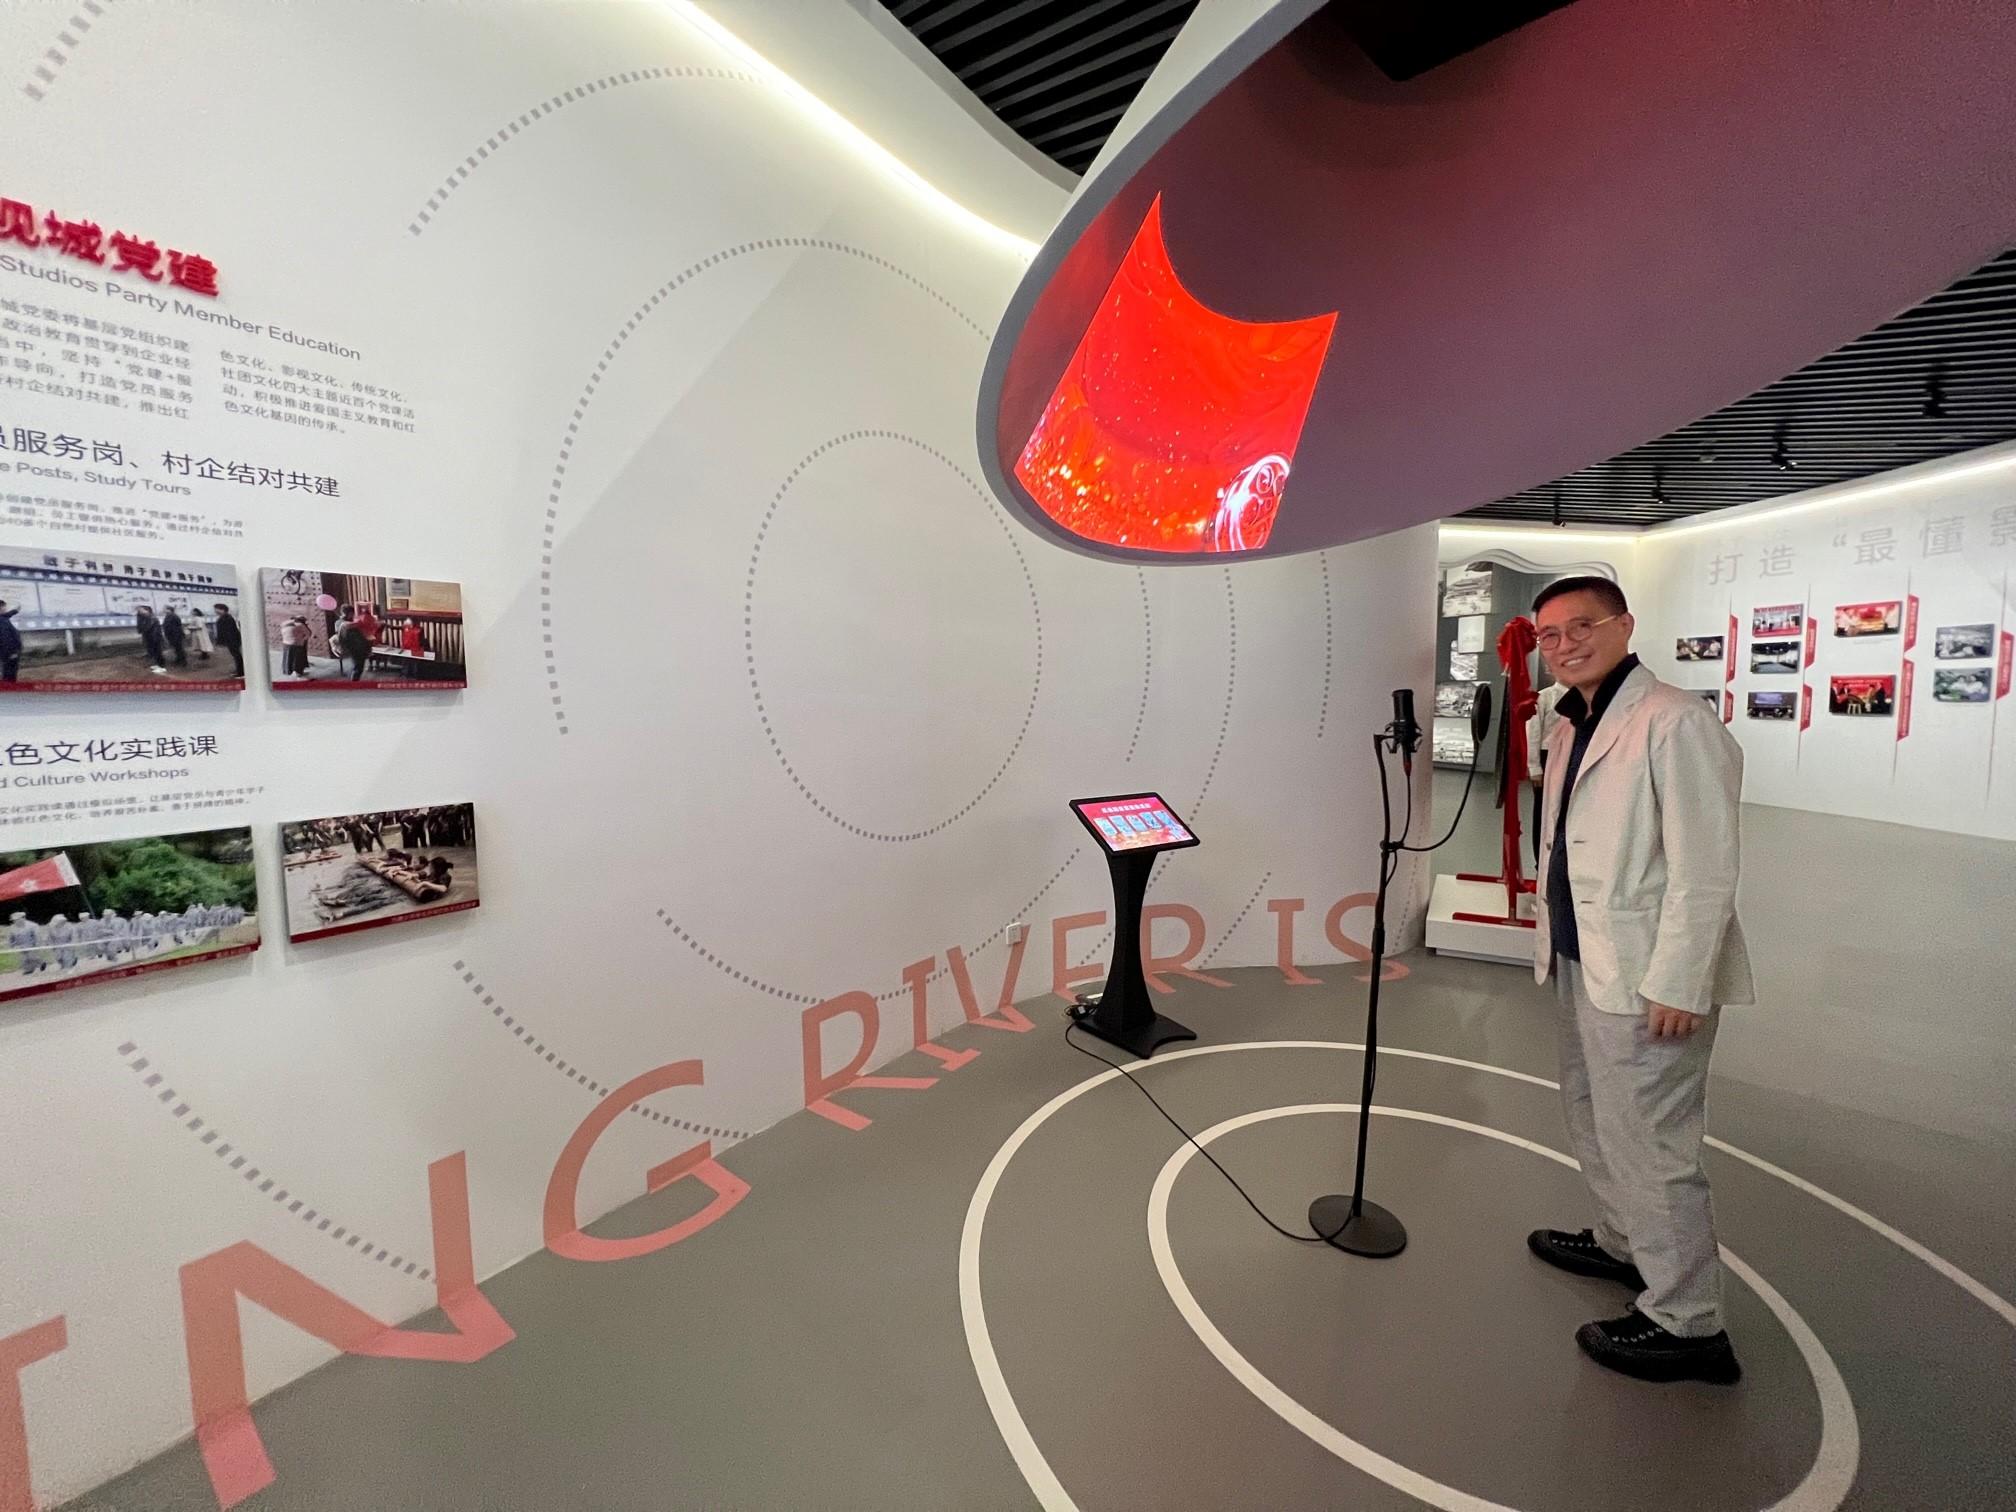 The Secretary for Culture, Sports and Tourism, Mr Kevin Yeung, today (August 2) visited Hengdian World Studios in Dongyang, Zhejiang Province, to get a grasp of the studio's development and opportunities arising for film industry workers. Photo shows Mr Yeung checking a voice-over device in an exhibition centre in Hengdian World Studios.